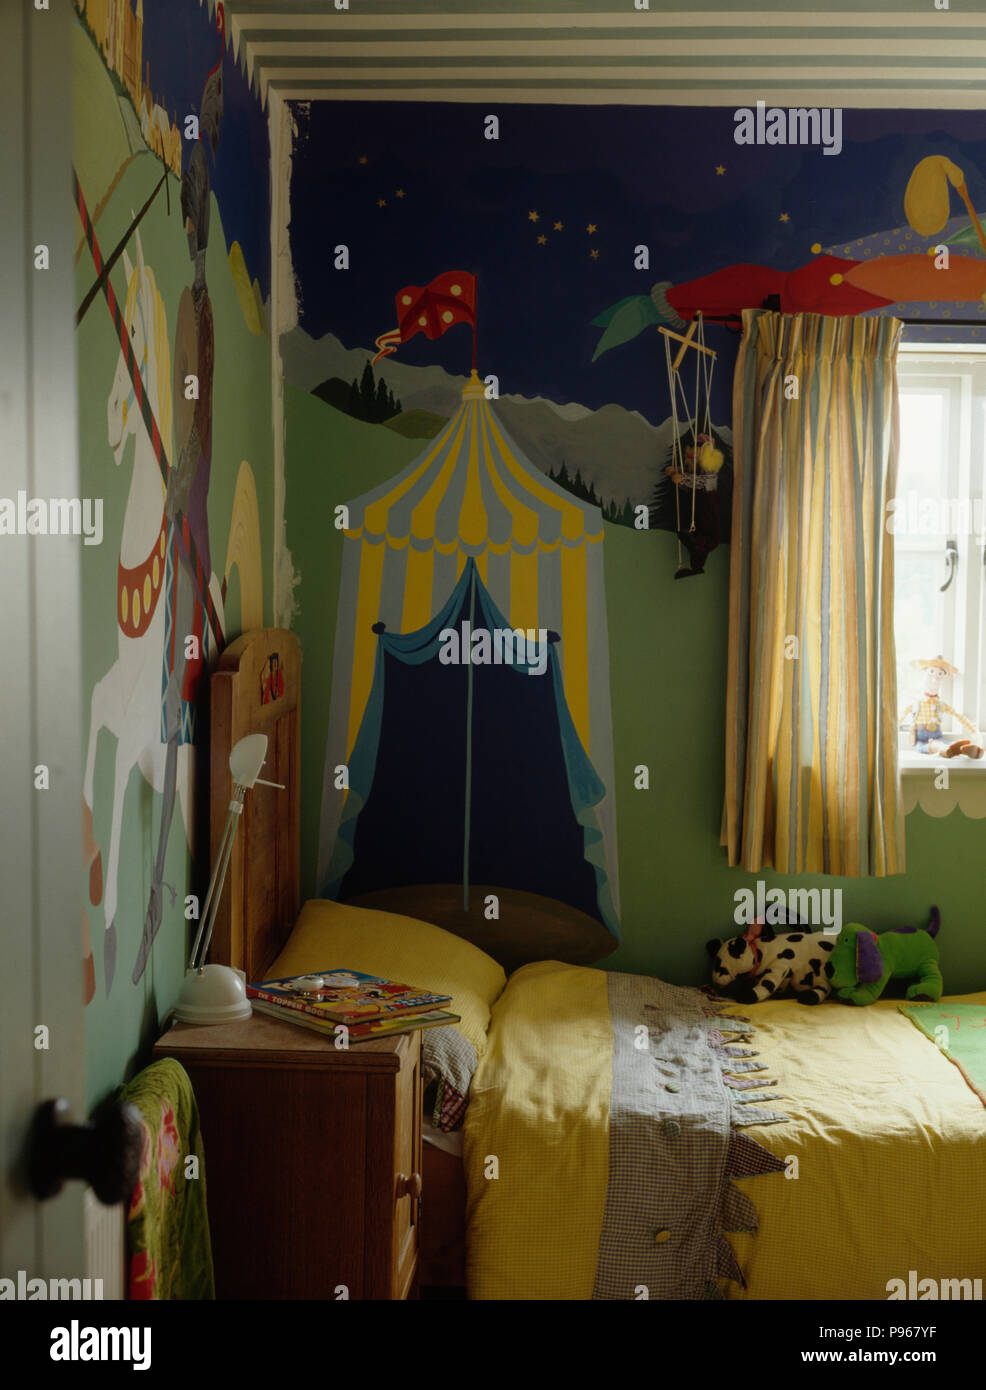 Paint effect mural on wall of child's bedroom with yellow bedlinen Stock Photo